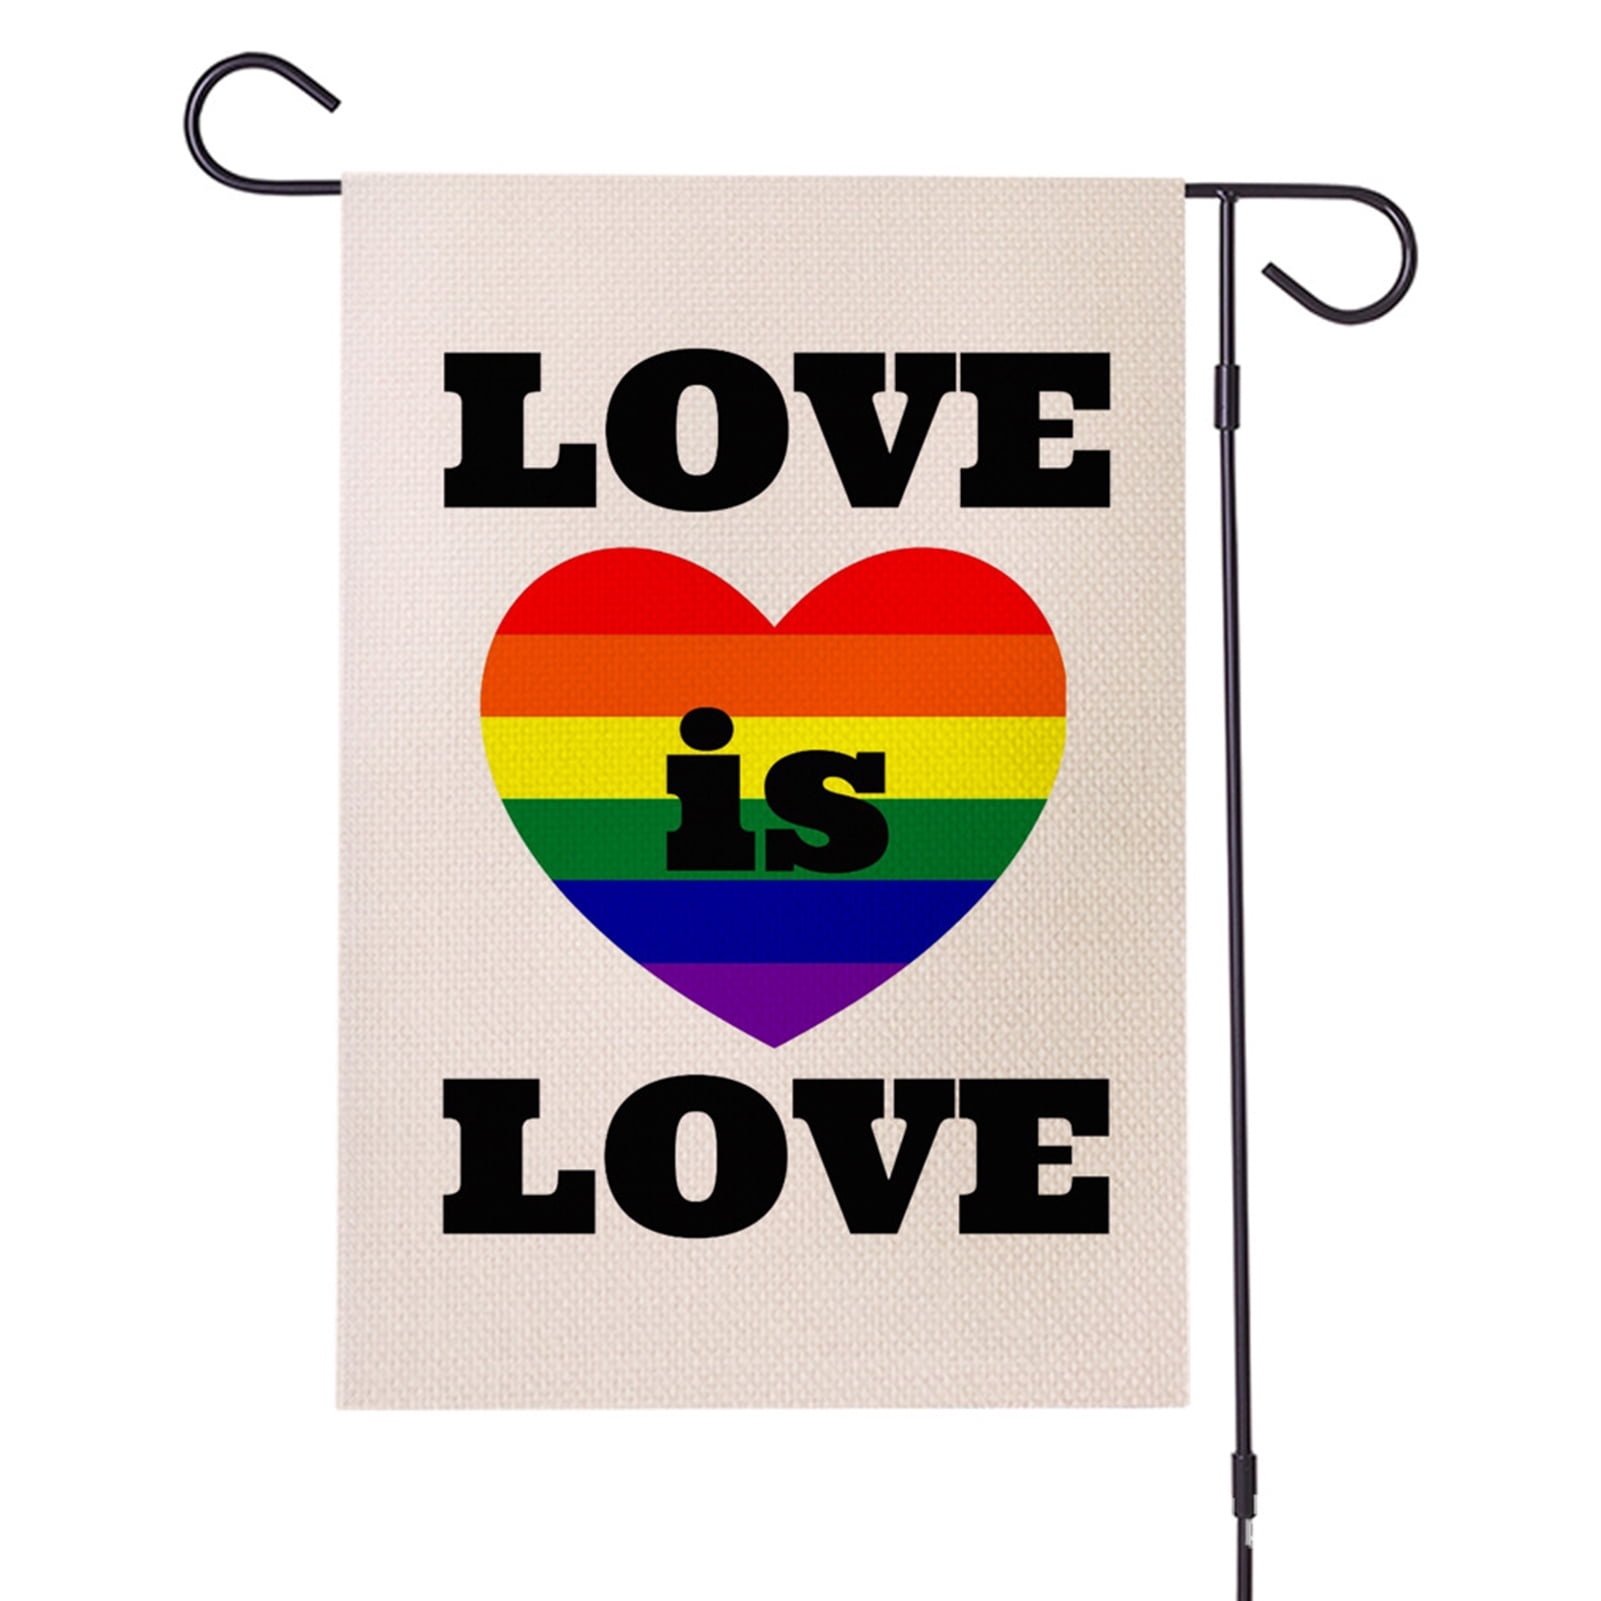 Linen Pride Day Garden Flag Love is Love LGBT Rainbow Hands Gay Lesbian Vertical Double Sized Yard Outdoor Decoration